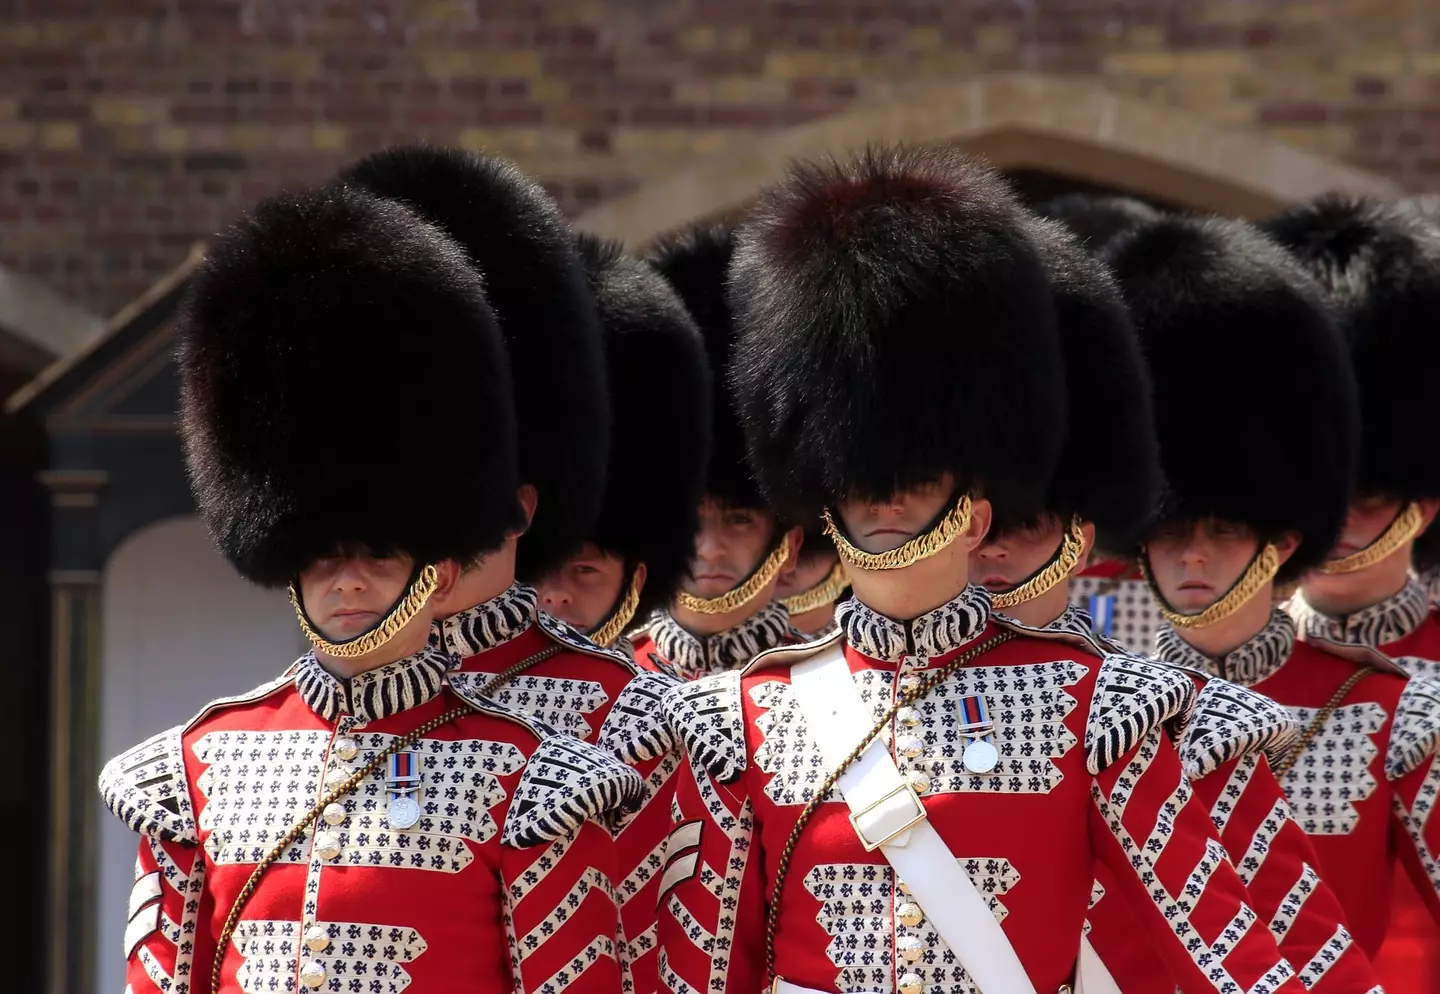 Royal guards are expected to stand for six hours at a time while on duty.